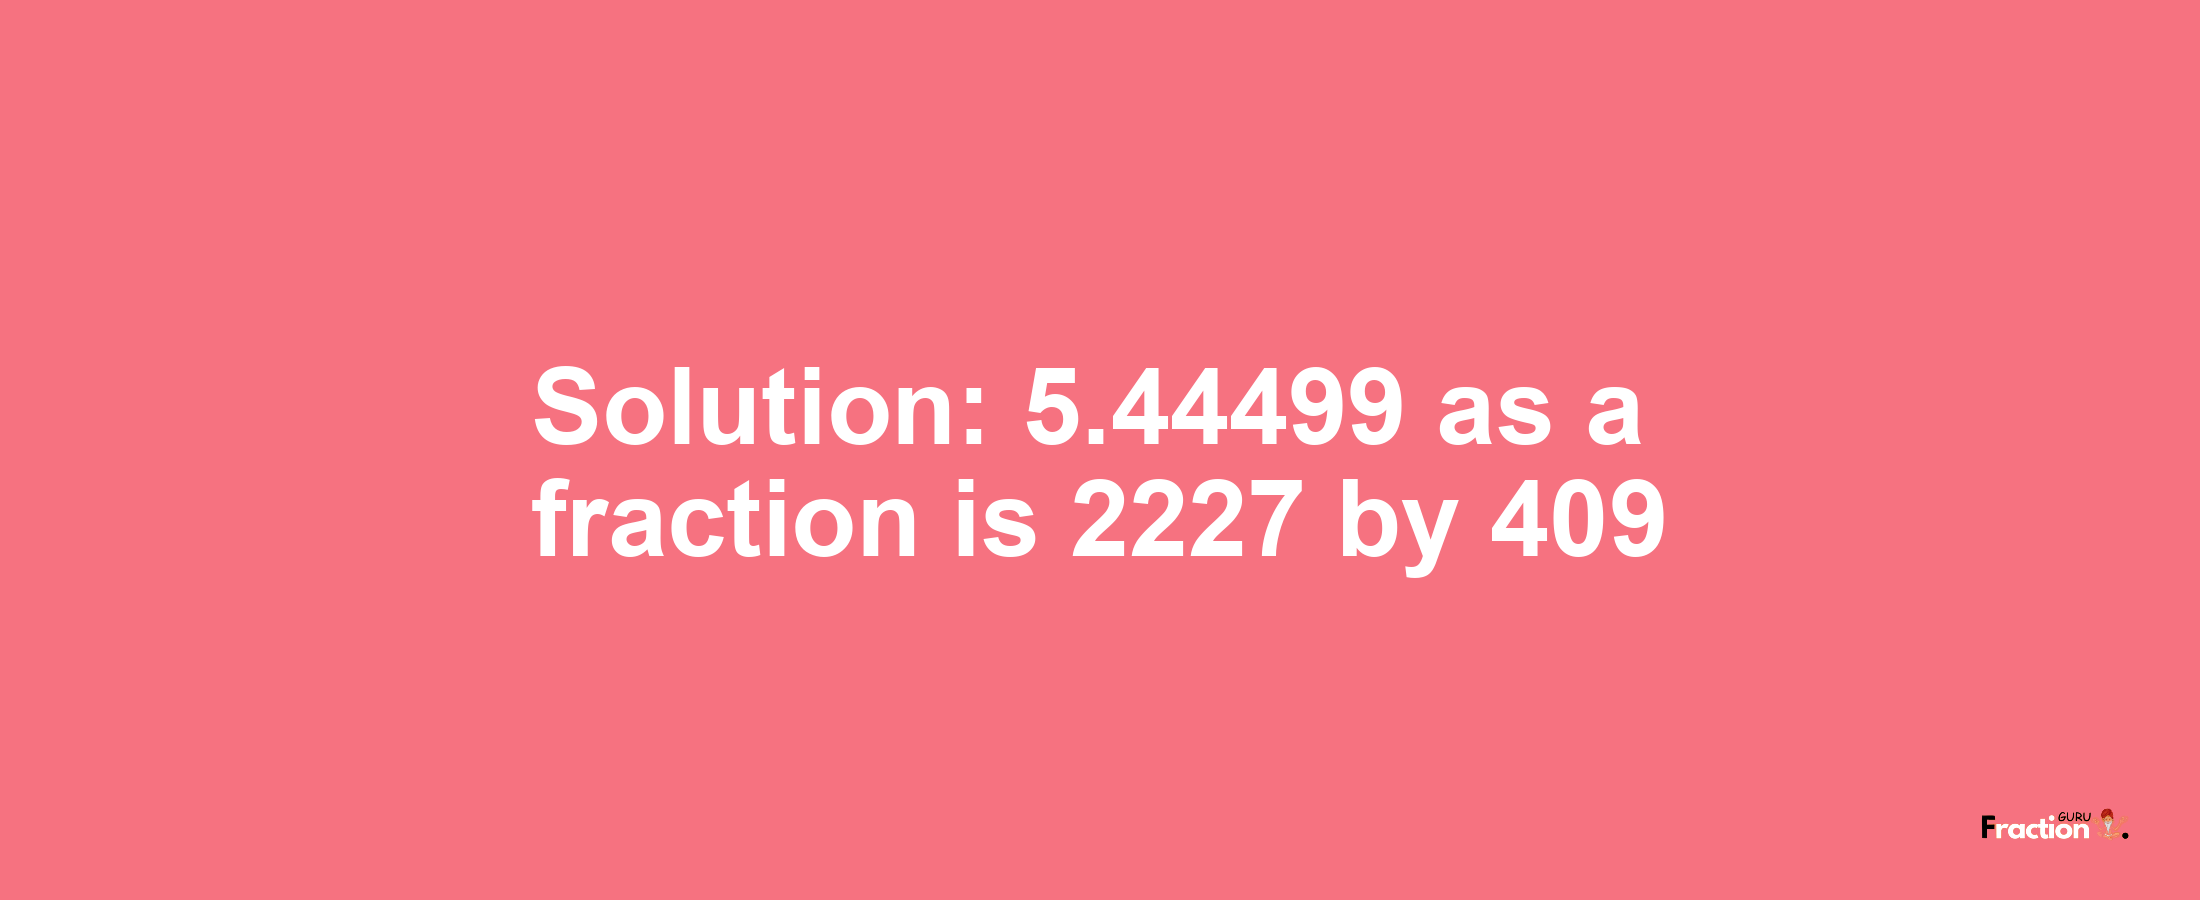 Solution:5.44499 as a fraction is 2227/409